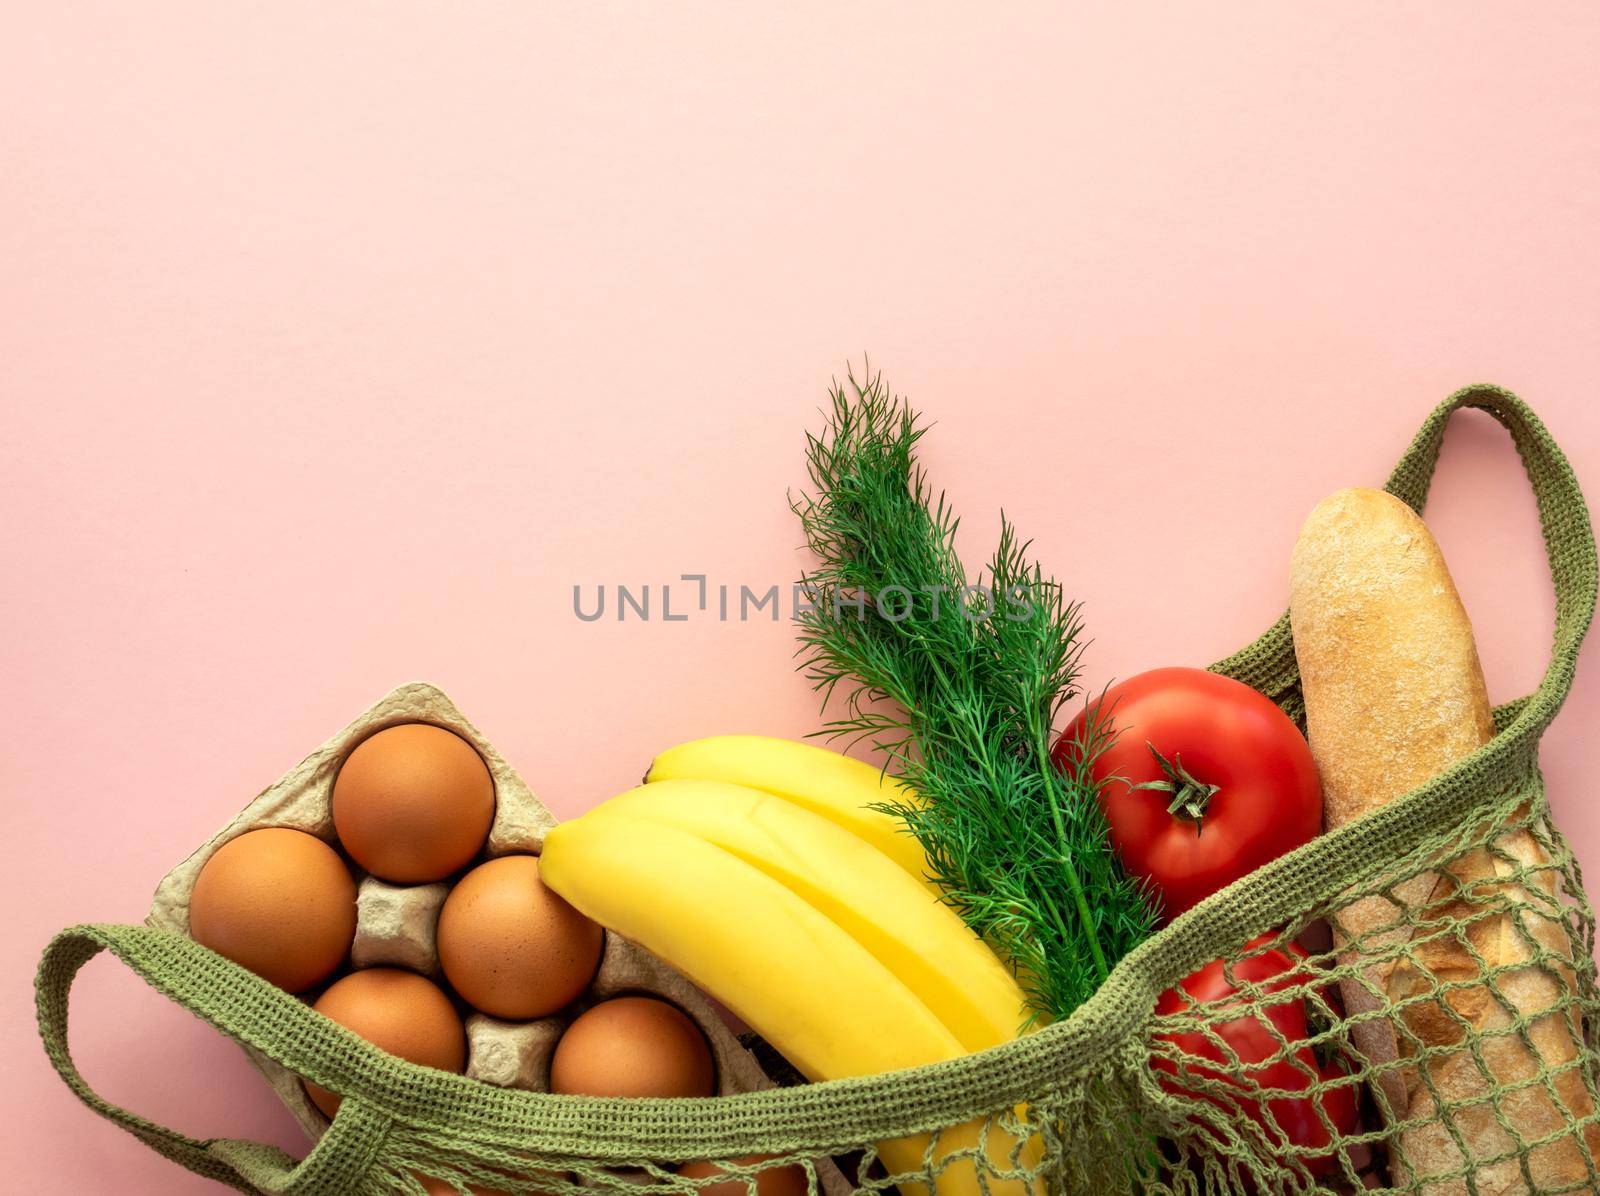 Eco concept - life without plastic. Zero waste concept. Package-free food shopping. Cotton mesh bag with products on pink background. Food delivery, donation, coronavirus, humanitarian assistance.